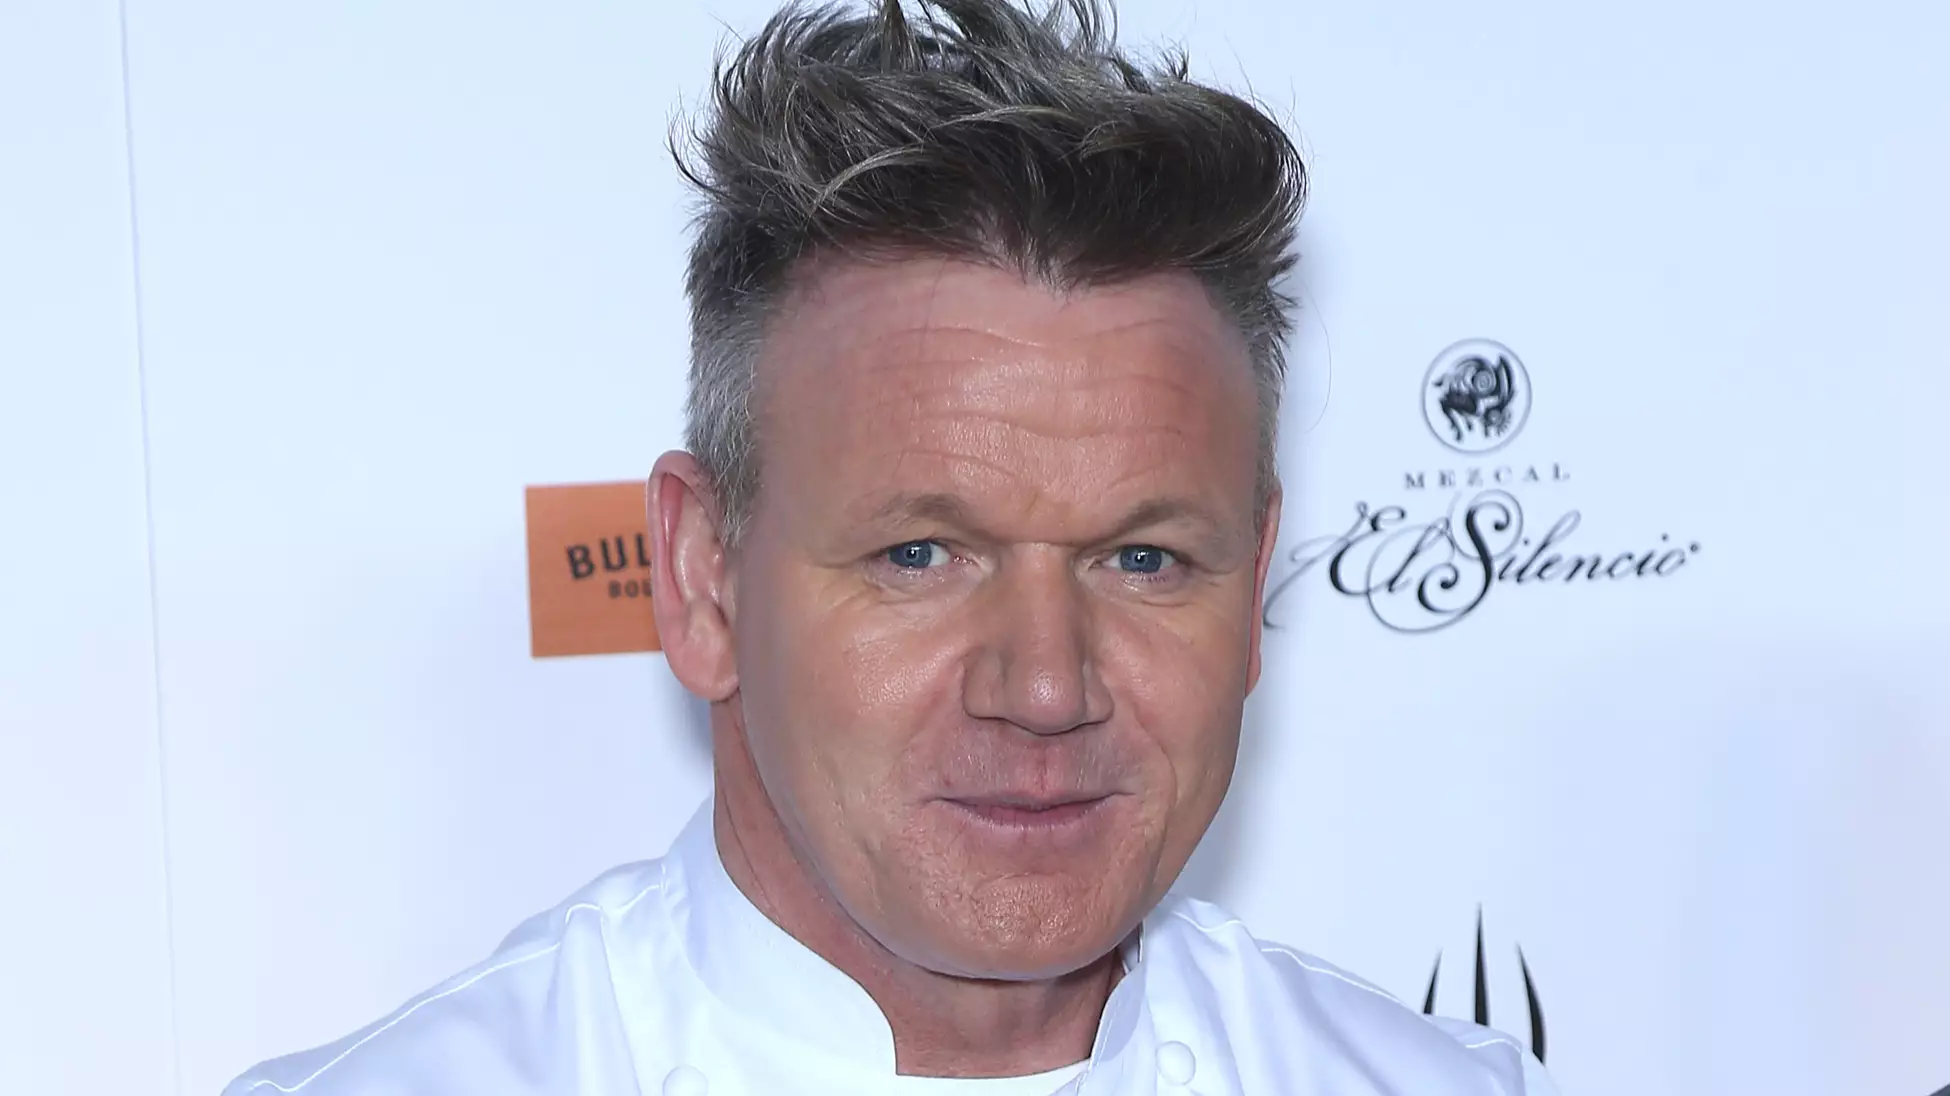 Gordon Ramsay Has Shared A Photo Of His Restaurant's Steak And Fans Hate It